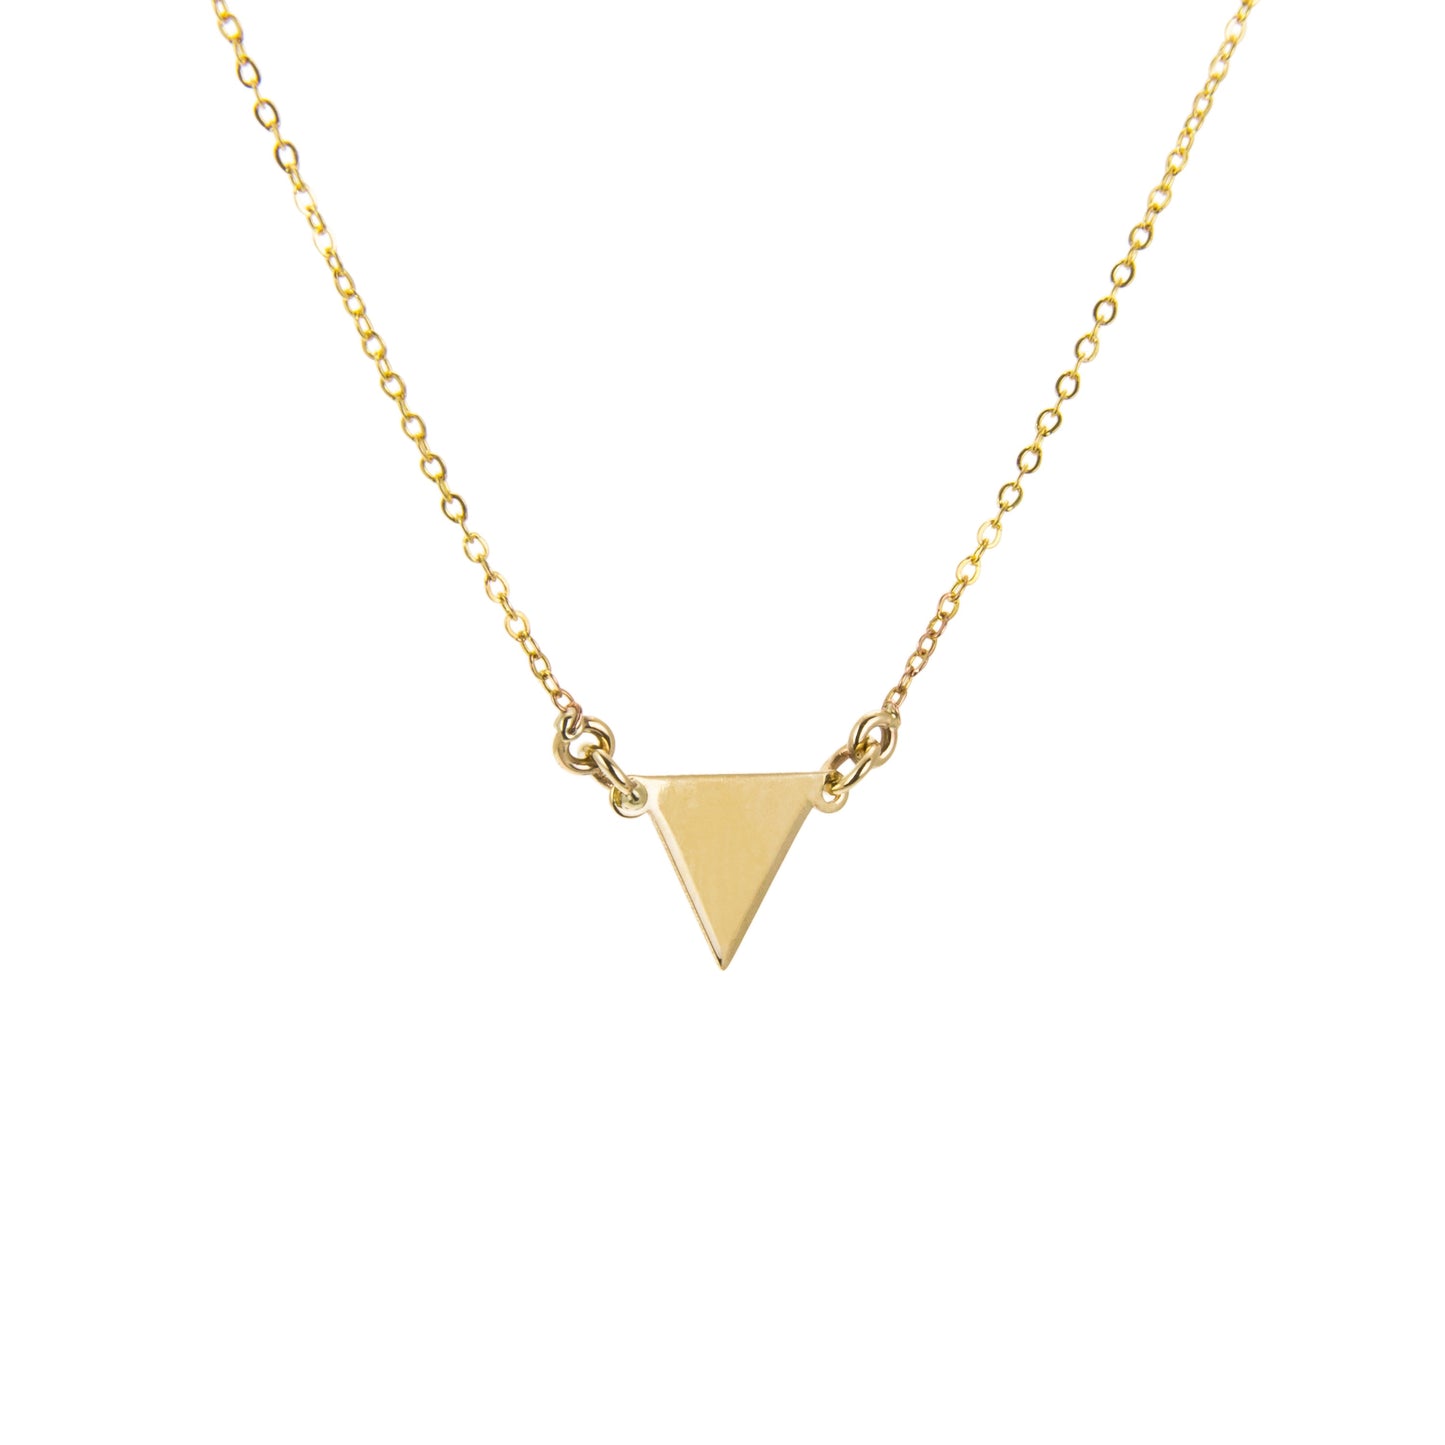 9ct Yellow Gold Flat Triangle Pendant Necklace